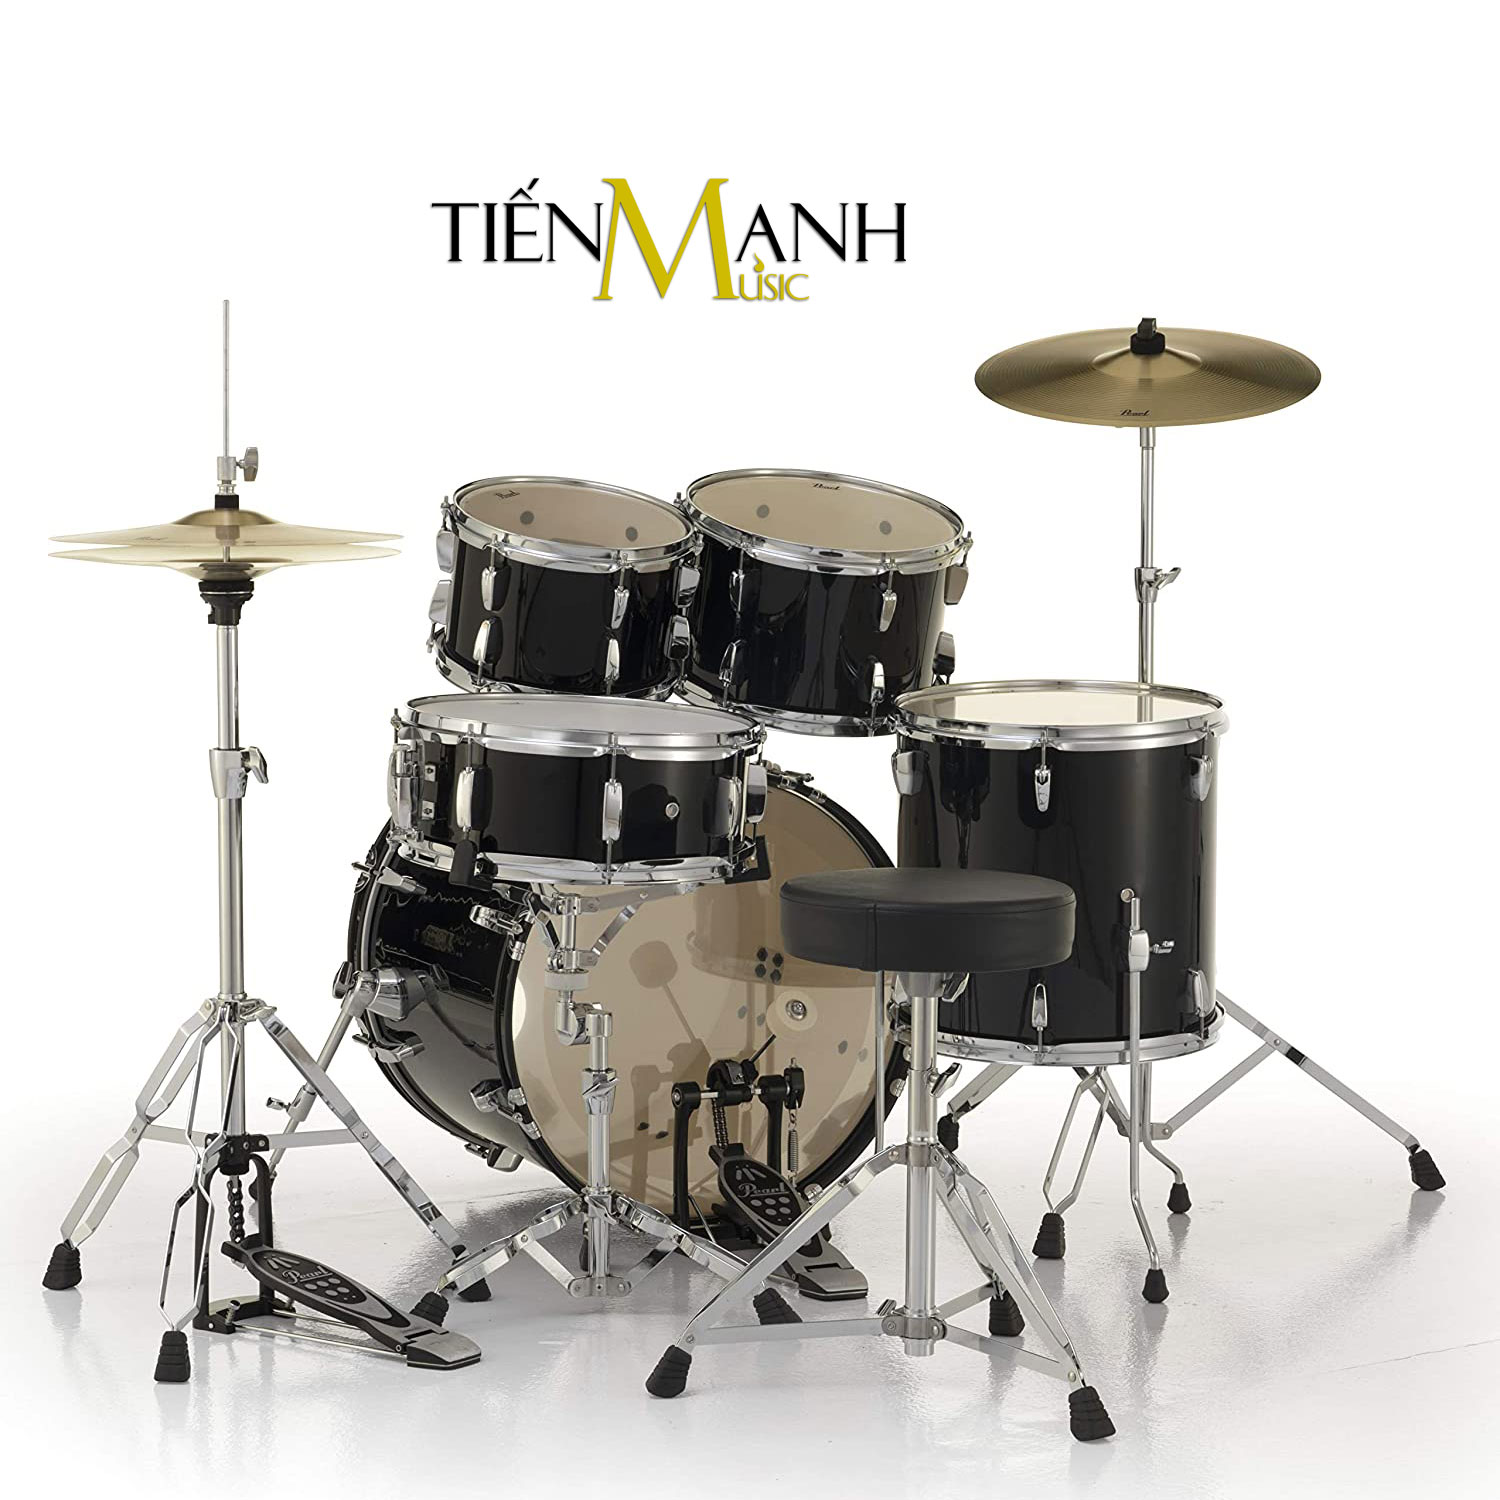 Cach-su-dung-Bo-Trong-Dan-Co-Pearl-Jazz-Drum-RS505C-C31.jpg